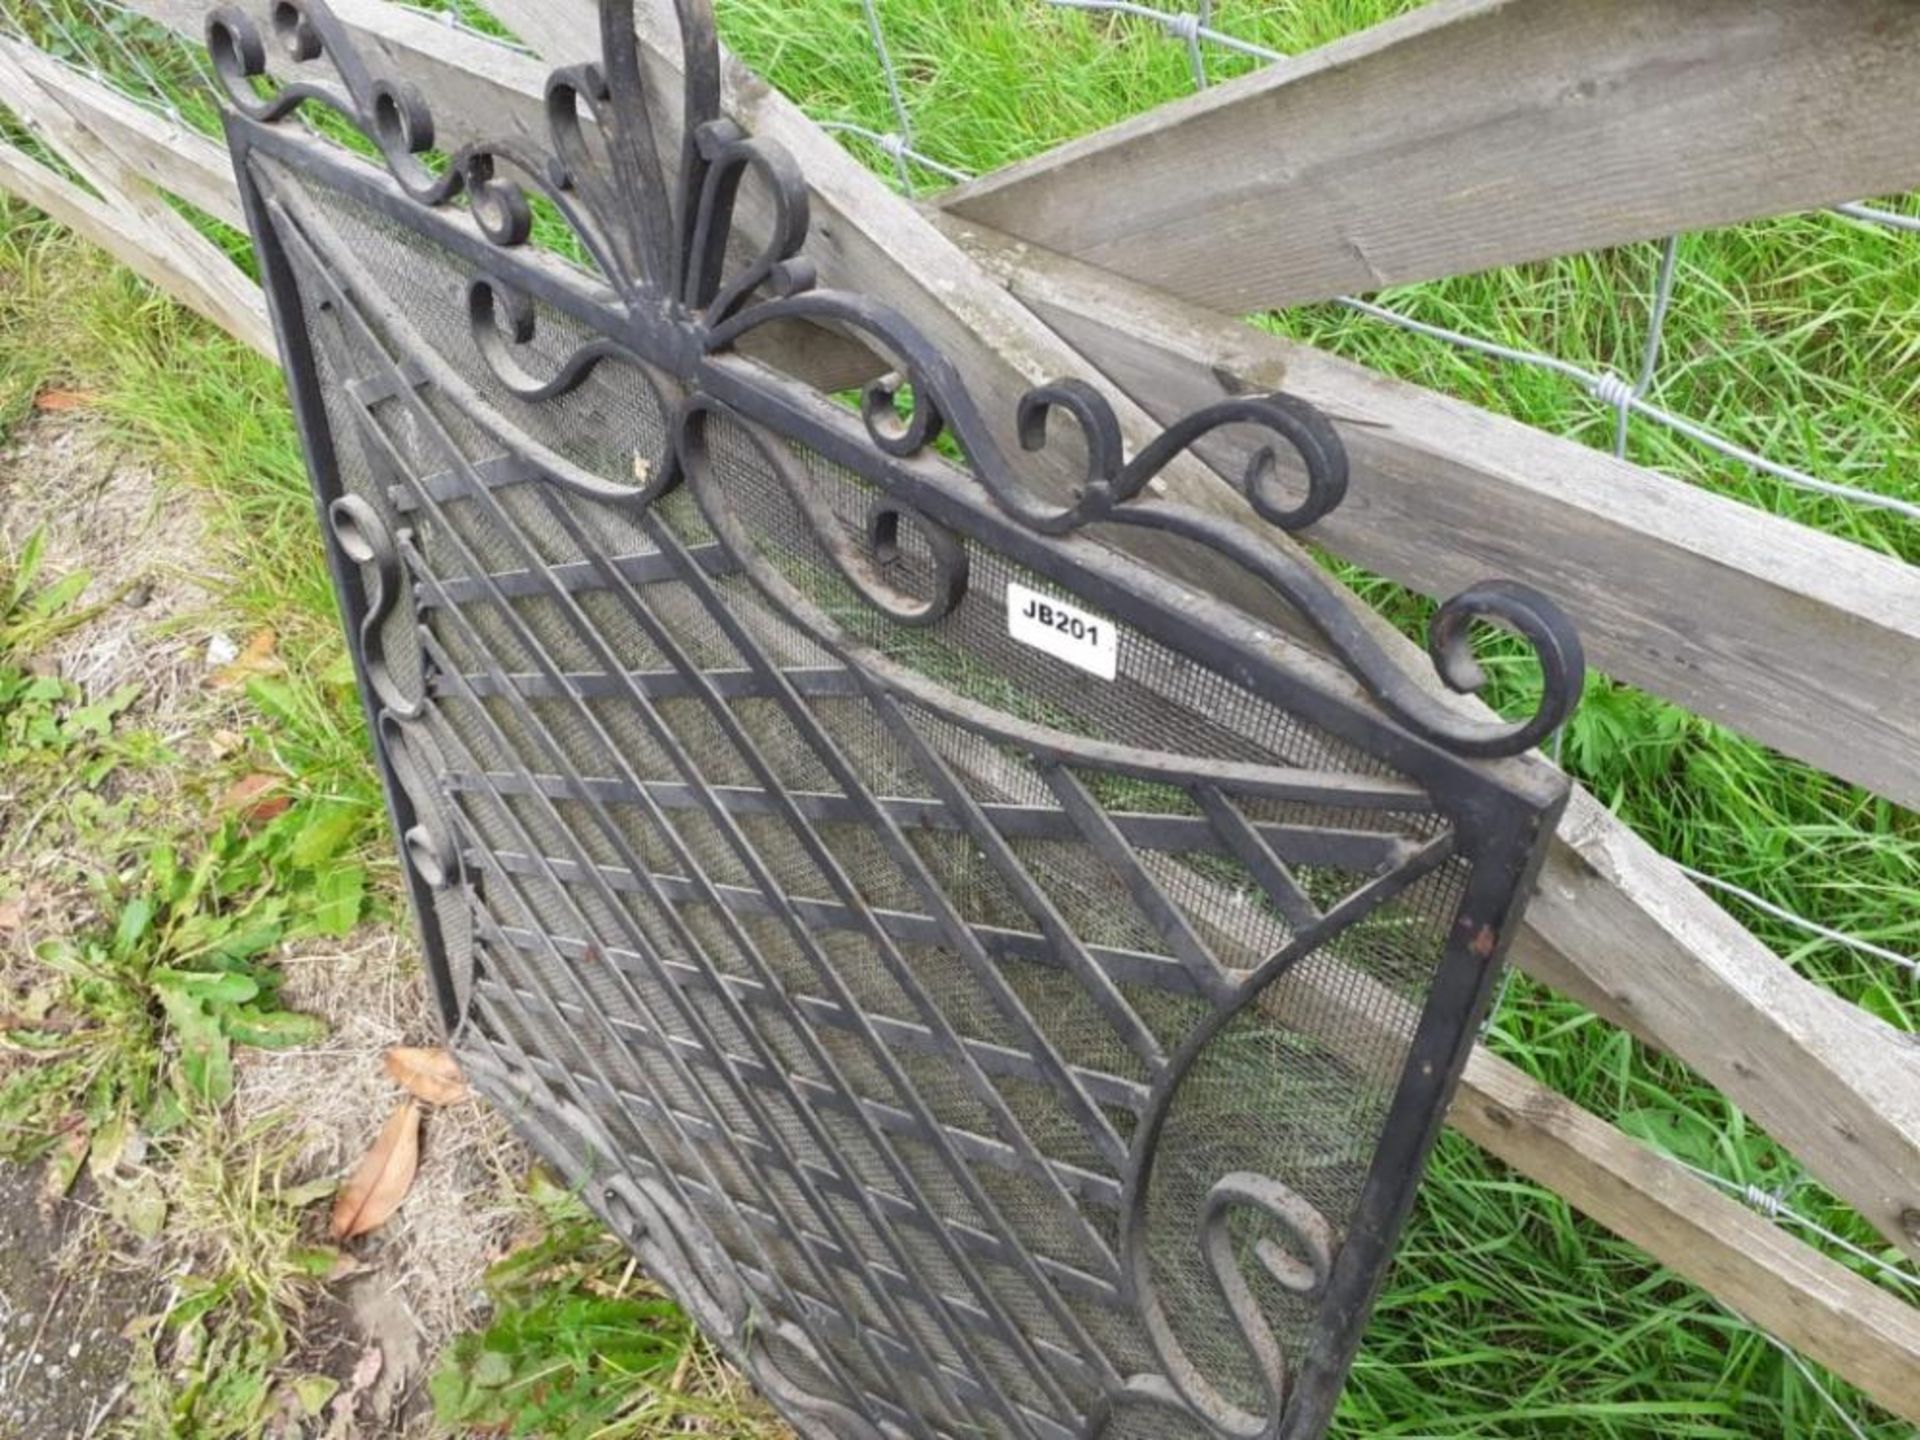 1 x Ornate Iron Fire Guard - Dimensions: width 76cm x height 92cm - Ref: JB201 - Pre-Owned - NO VAT - Image 2 of 3